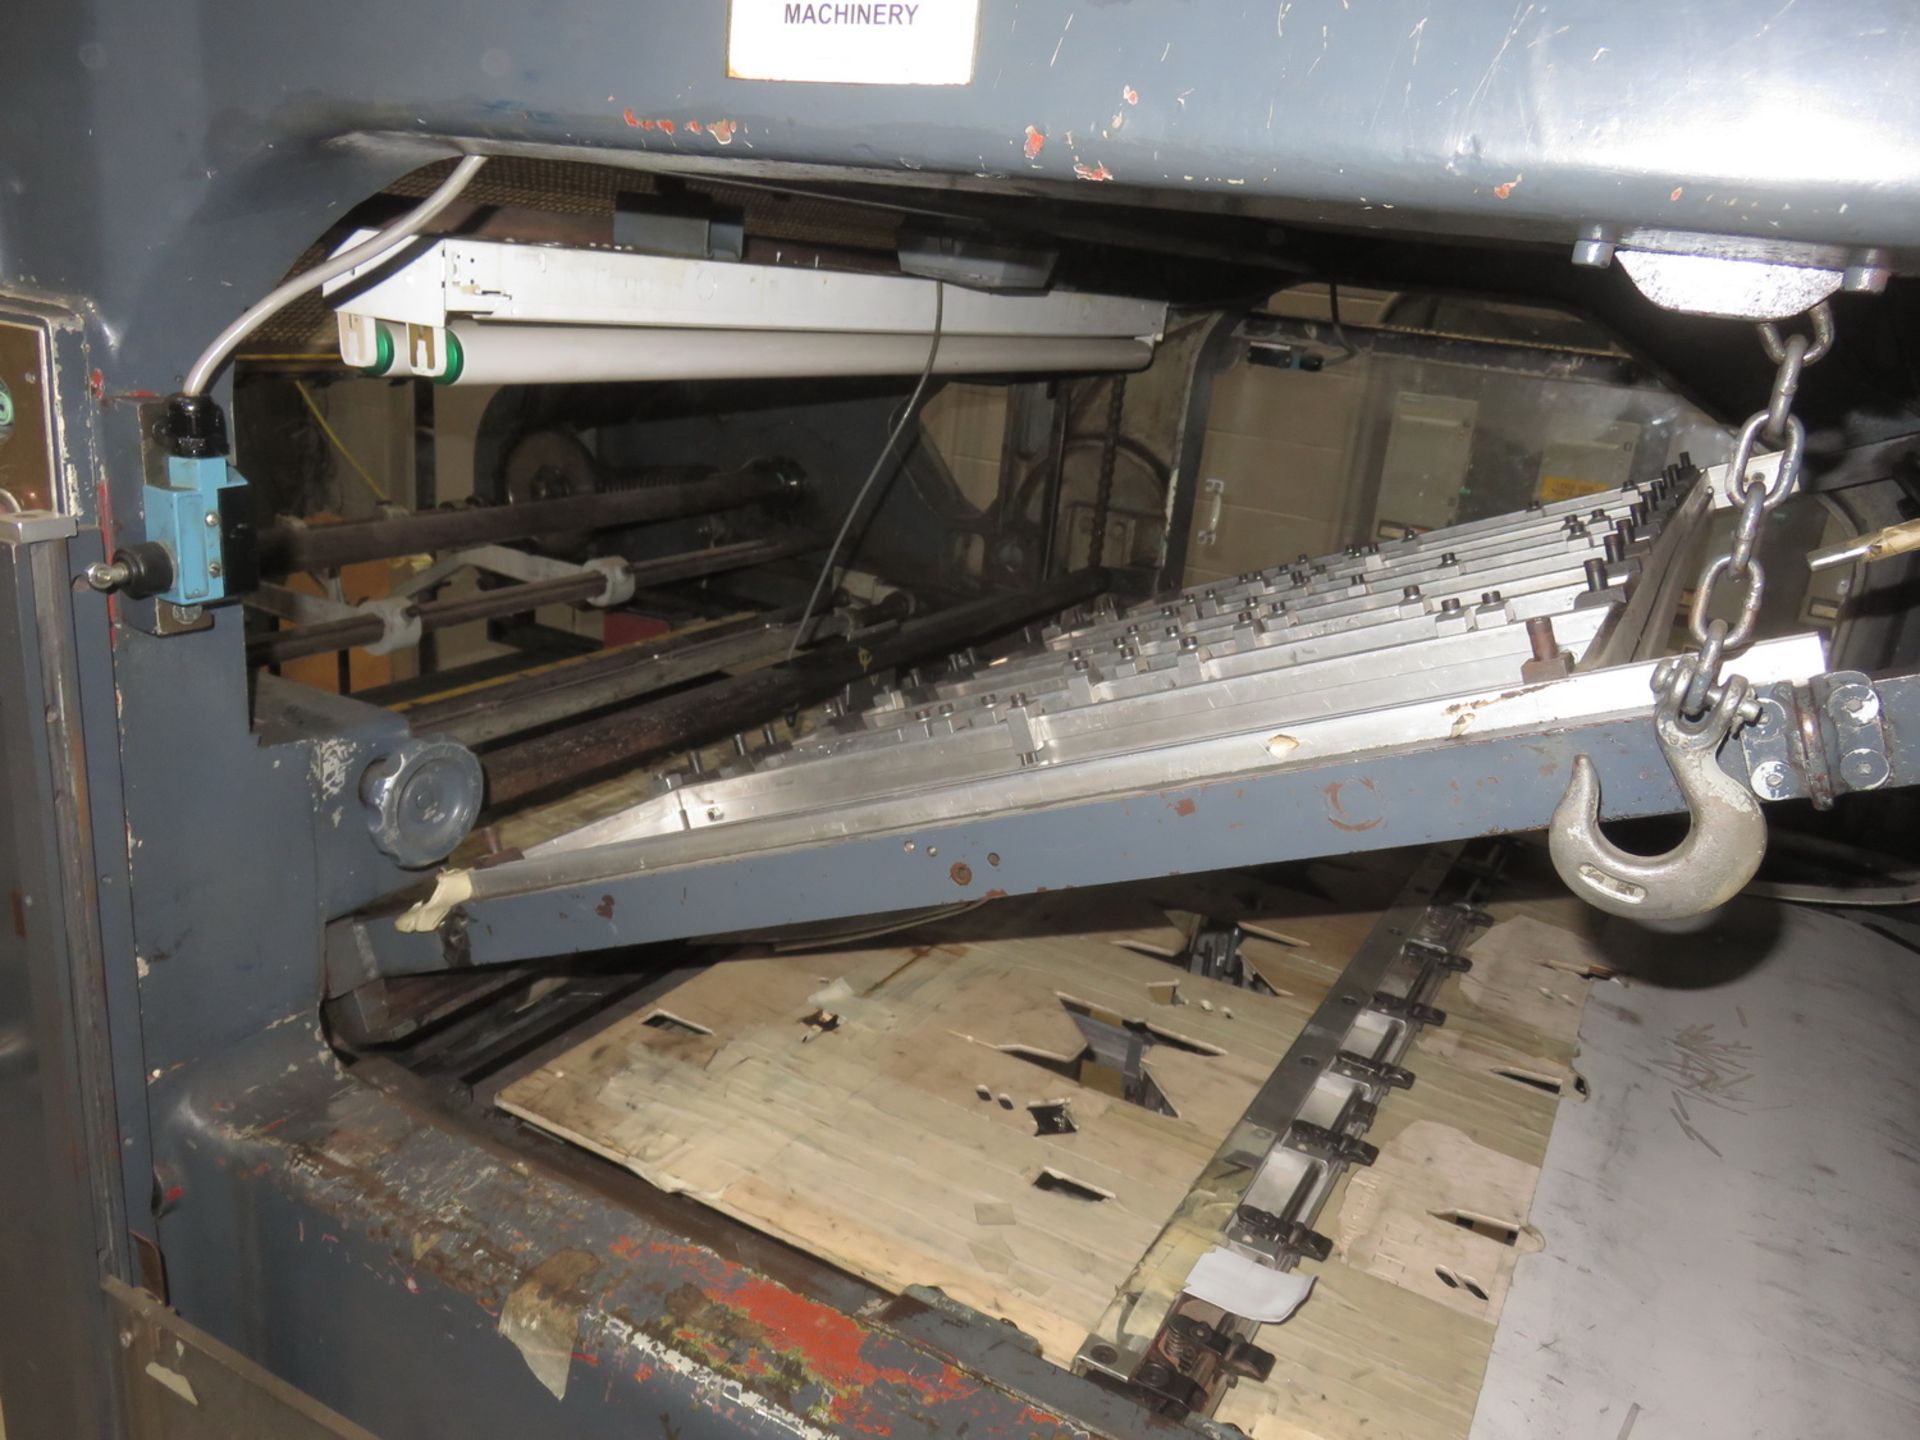 BOBST AUTO PLATEN MOD 8P-1260-E, DIE CUTTER, MAX CUTTING FORCE 550 TON CAPACITY, 36.25 X 49.5" MAX - Image 4 of 8